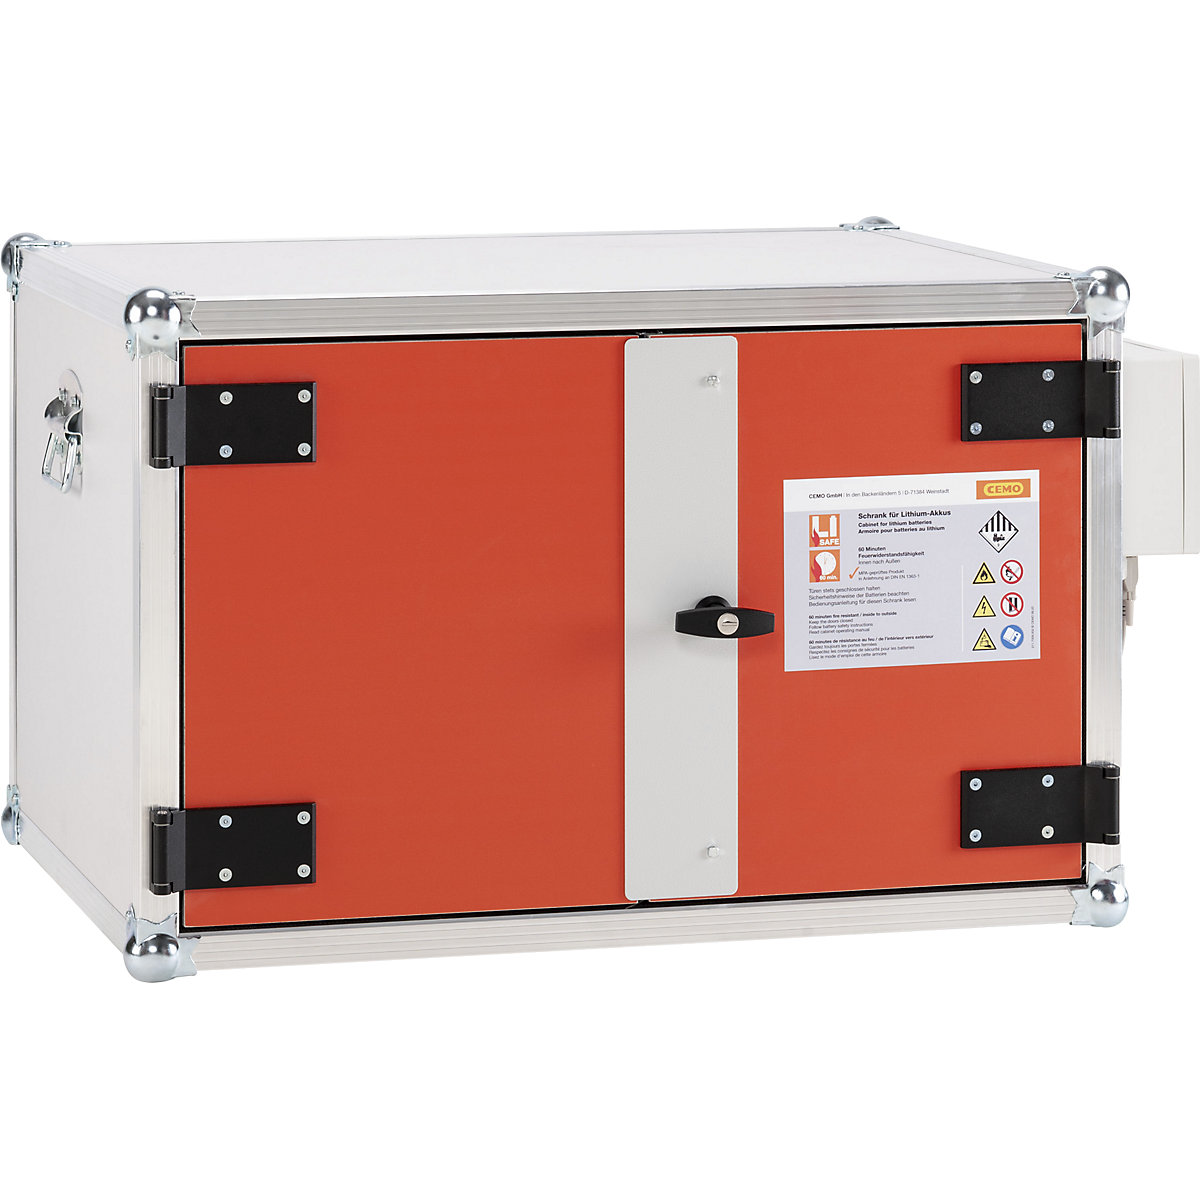 FR 60 safety battery charging cabinet – CEMO